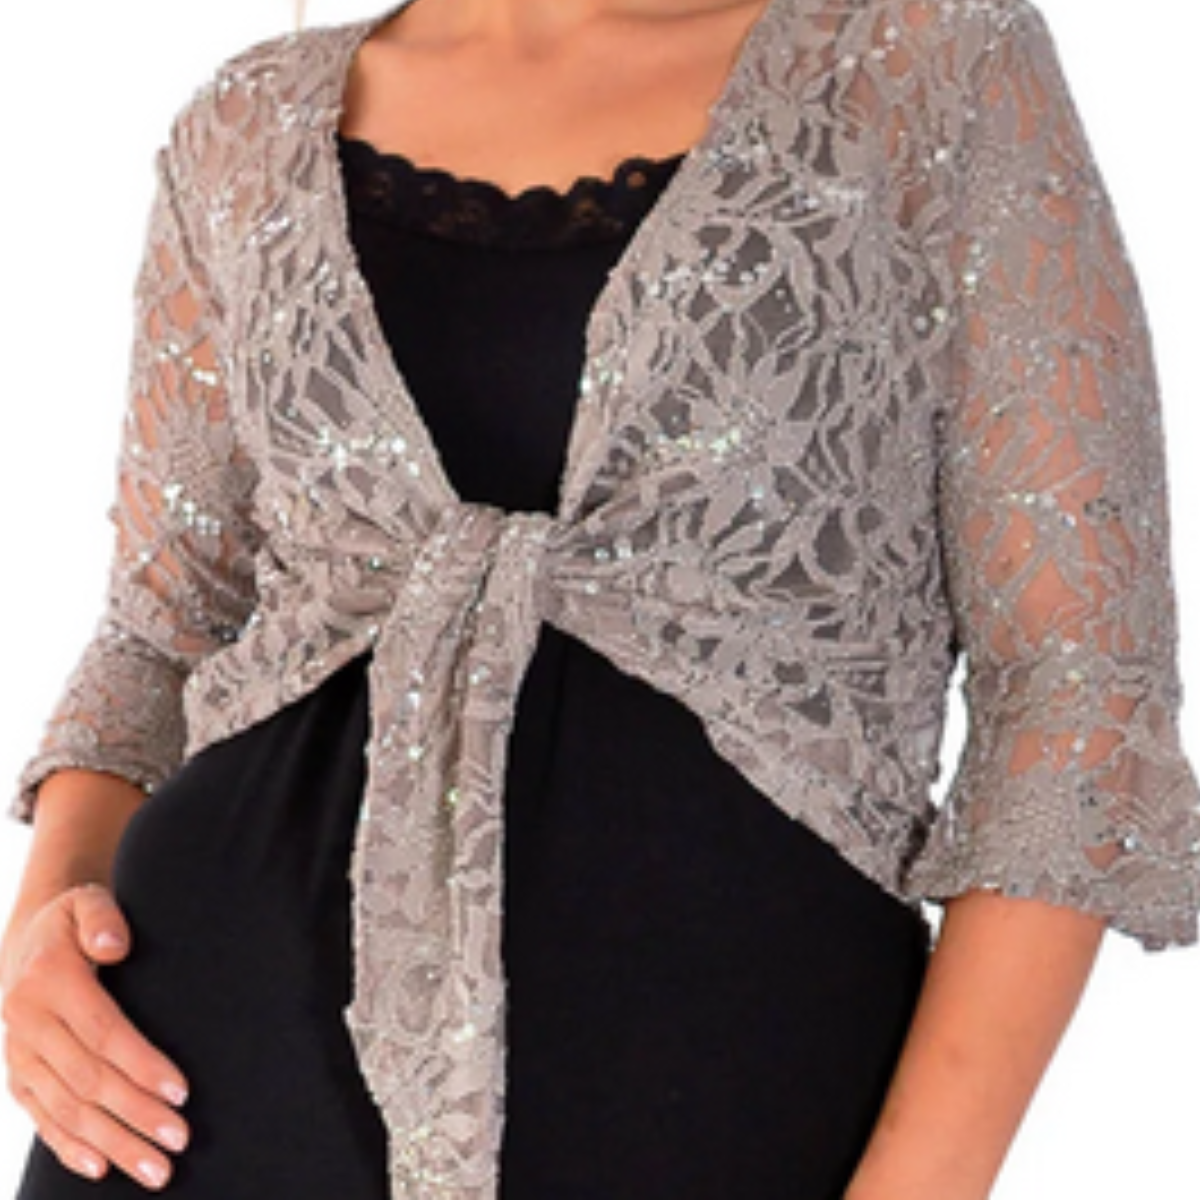 SEQUIN AND LACE 1/2 BELL SLEEVE TIE FRONT SHRUG / BOLERO JACKET